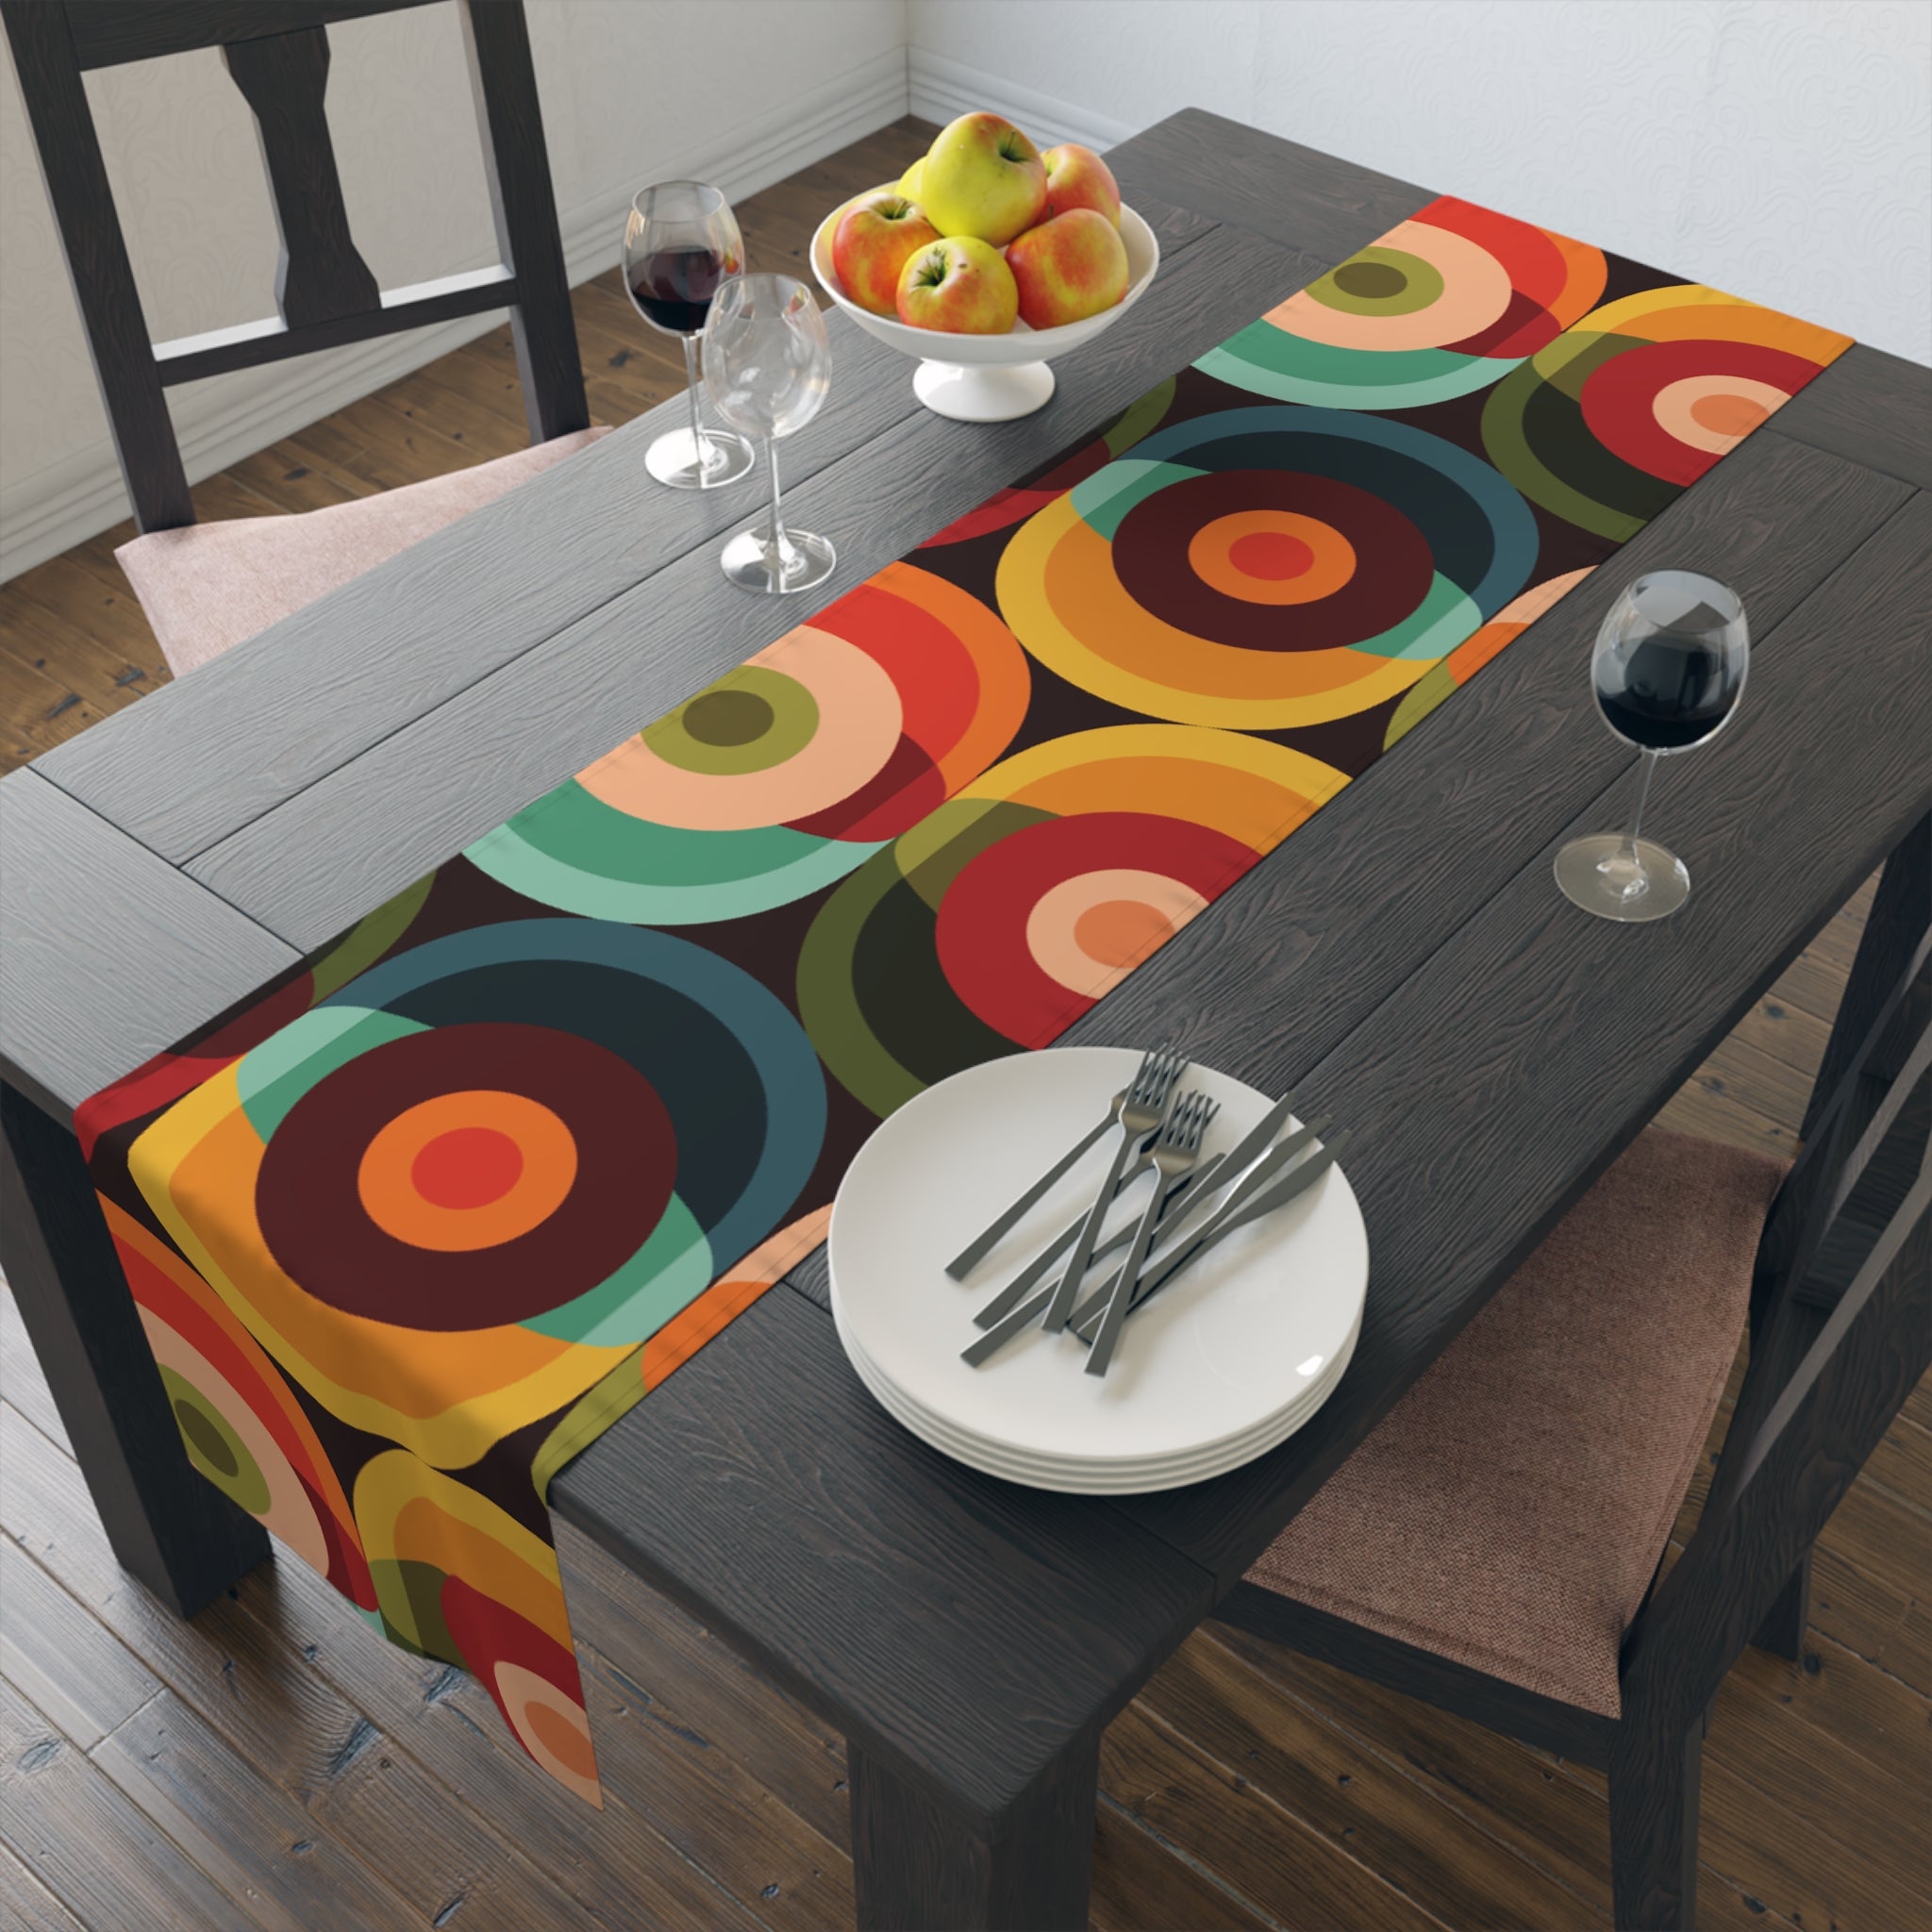 Kate McEnroe New York Retro Groovy Geometric Circle Orbs Table Runner, 70s Mid Century Modern Psychedelic Abstract Table LinensTable Runners51712219944357181454